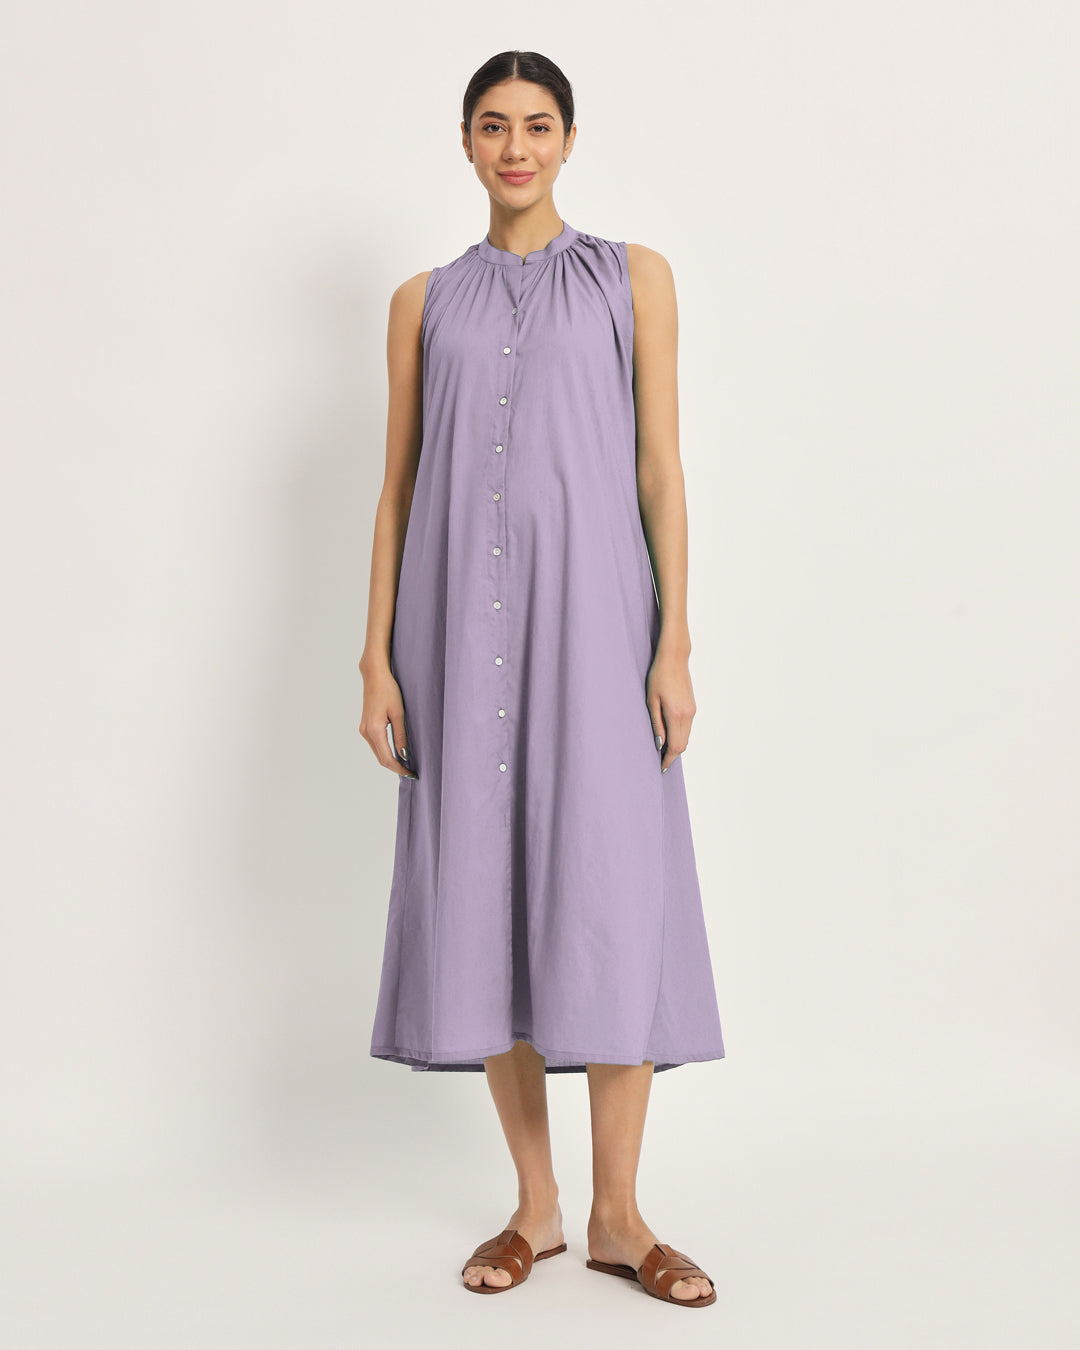 Combo: Lilac & Sage Green Mommy Must-Haves Maternity & Nursing Dress